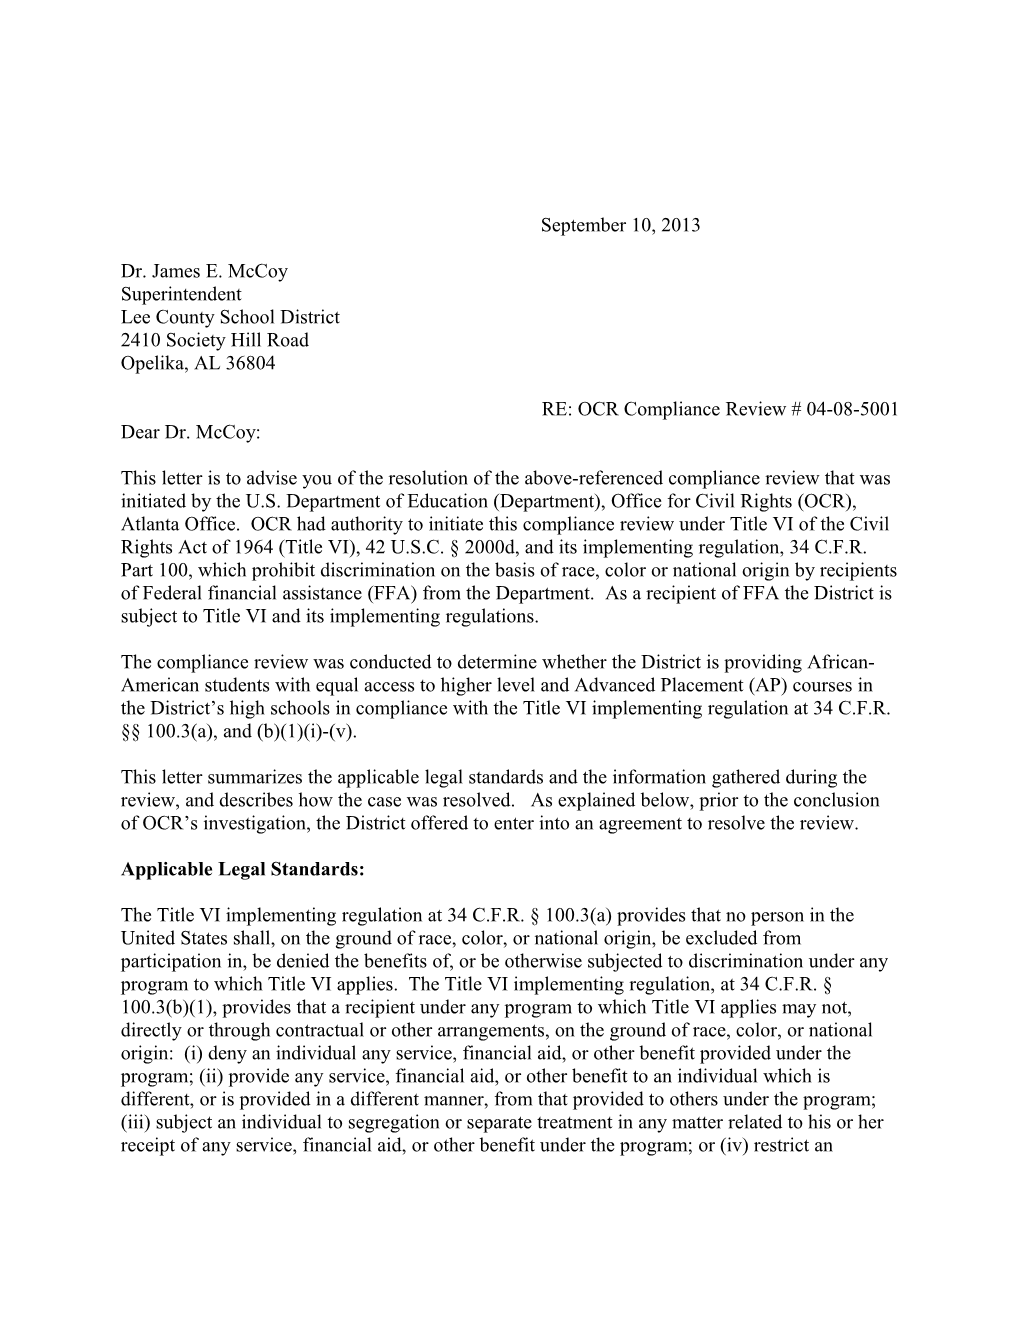 Resolution Letter to Lee County School District, Alabama: Compliance Review #04-08-5001